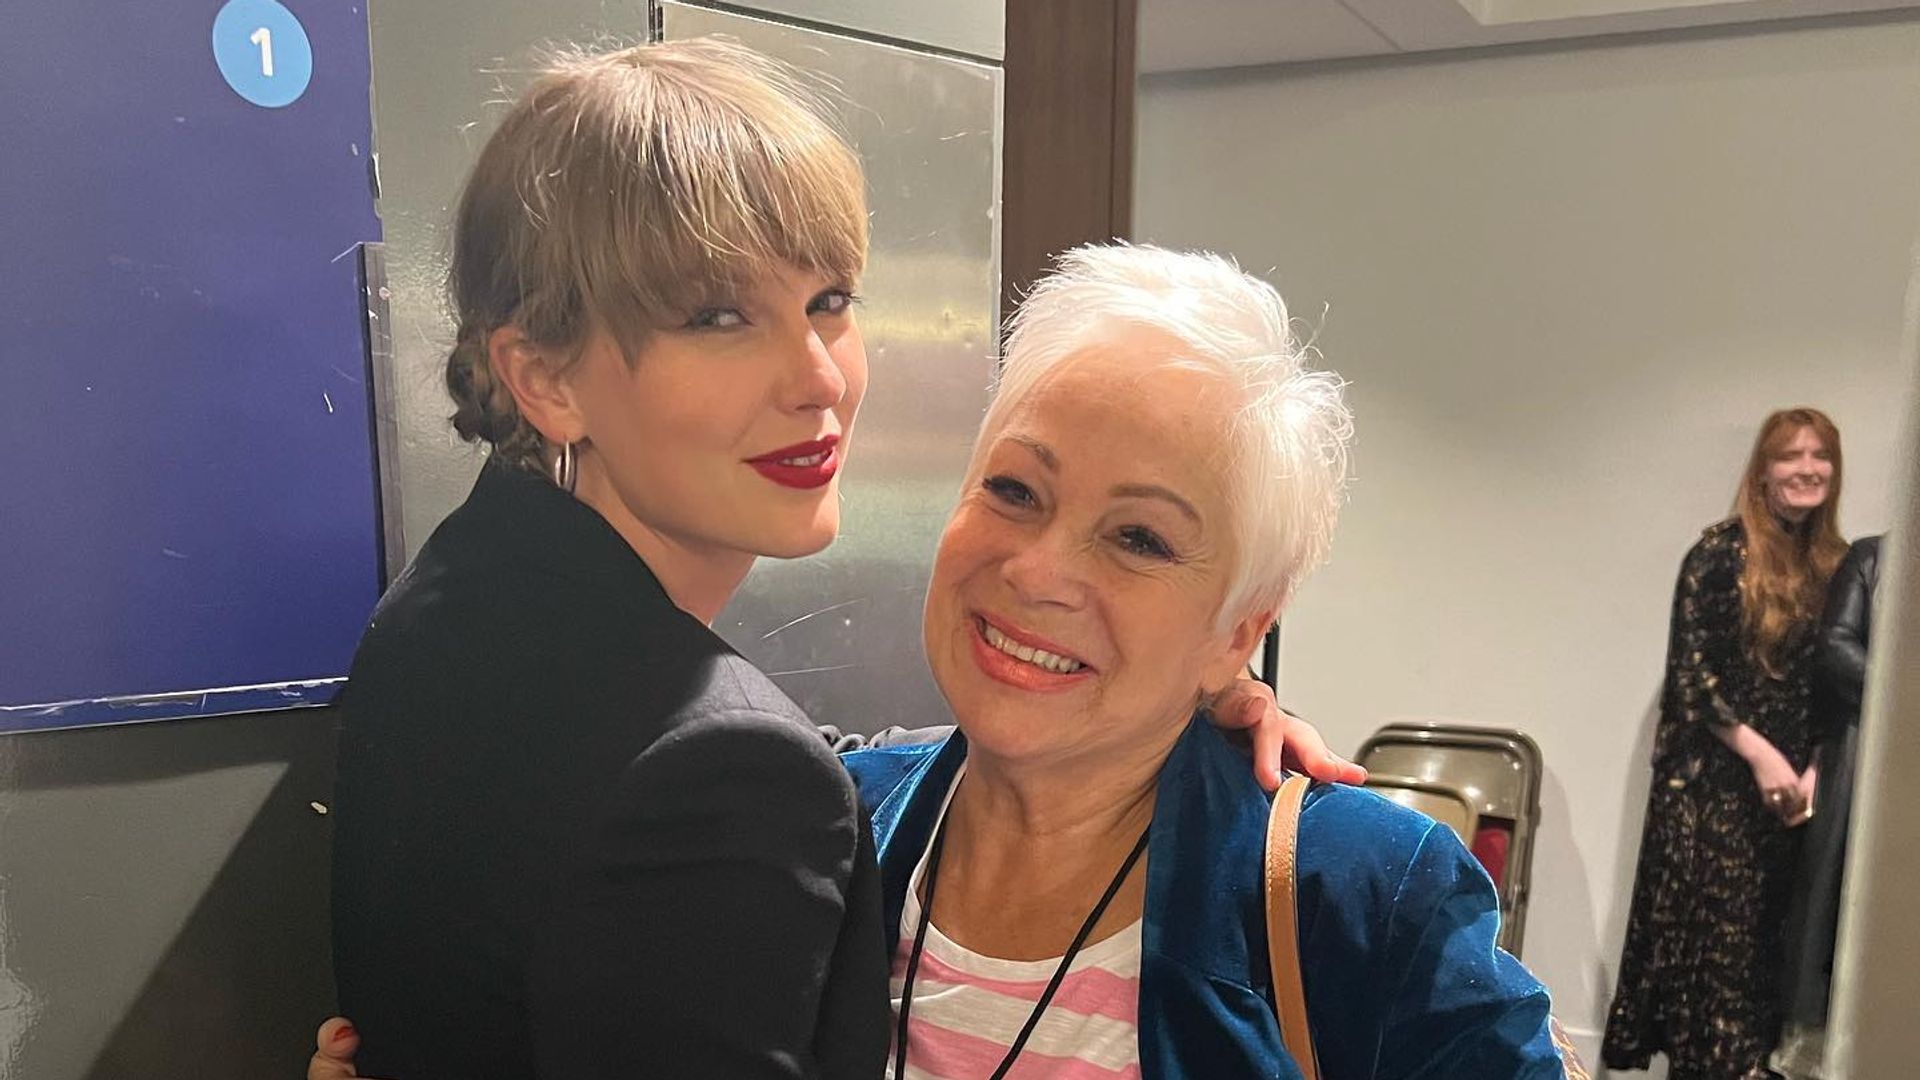 Matty Healy's mom breaks silence on Taylor Swift's songs about her son – see her 'awkward' reaction